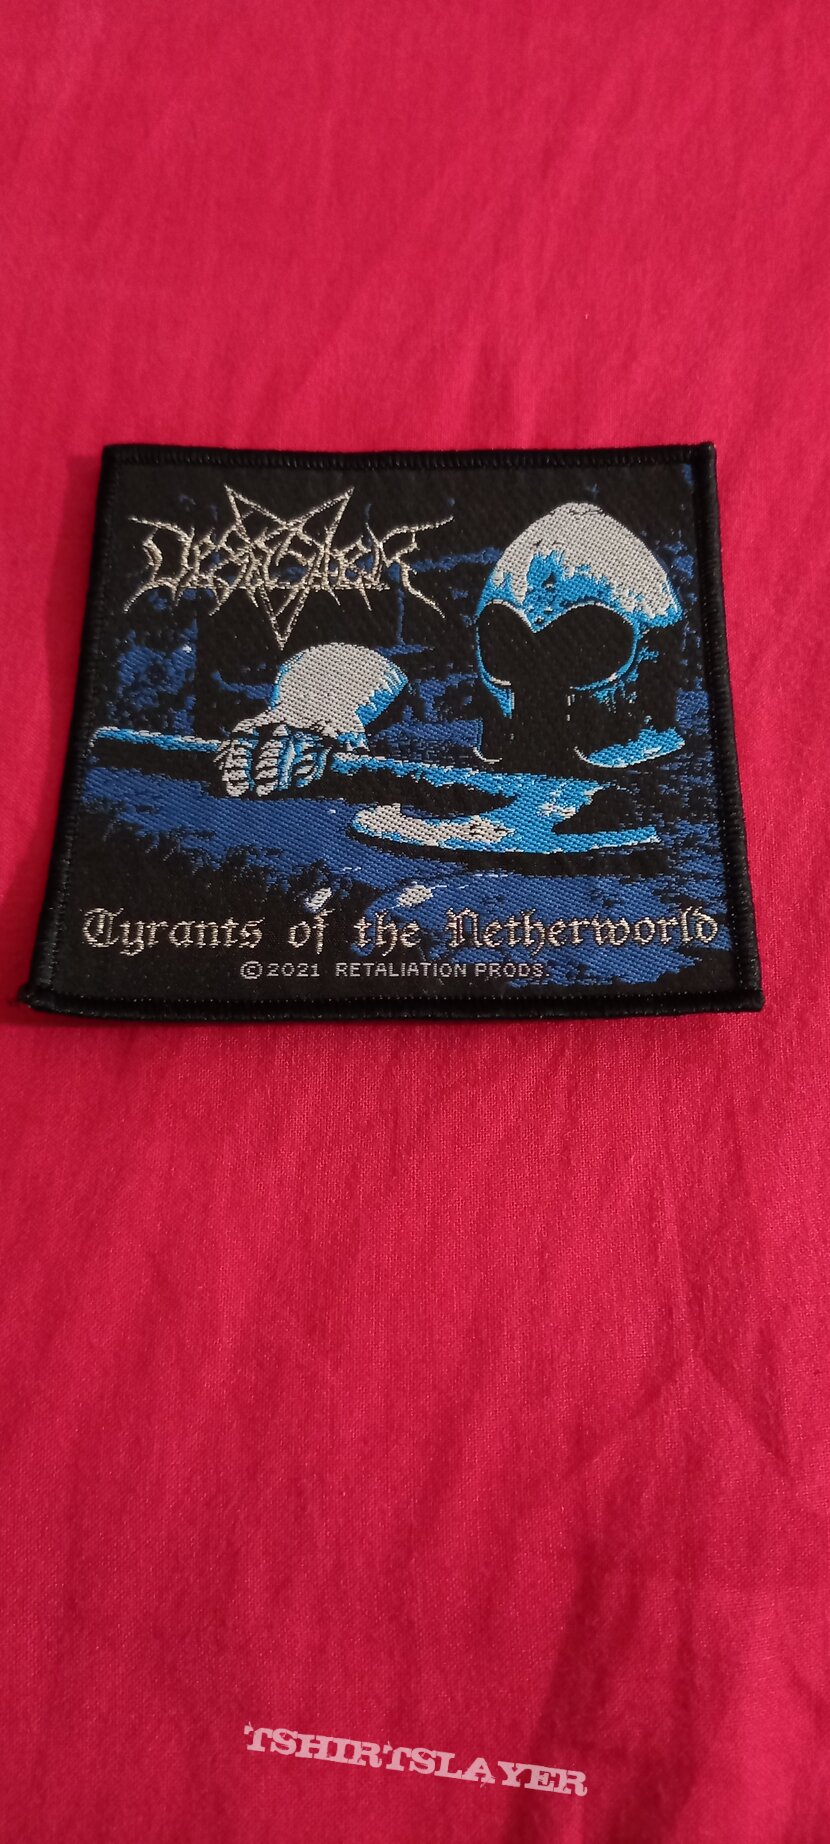 Desaster - Tyrants of the Netherworld Patch